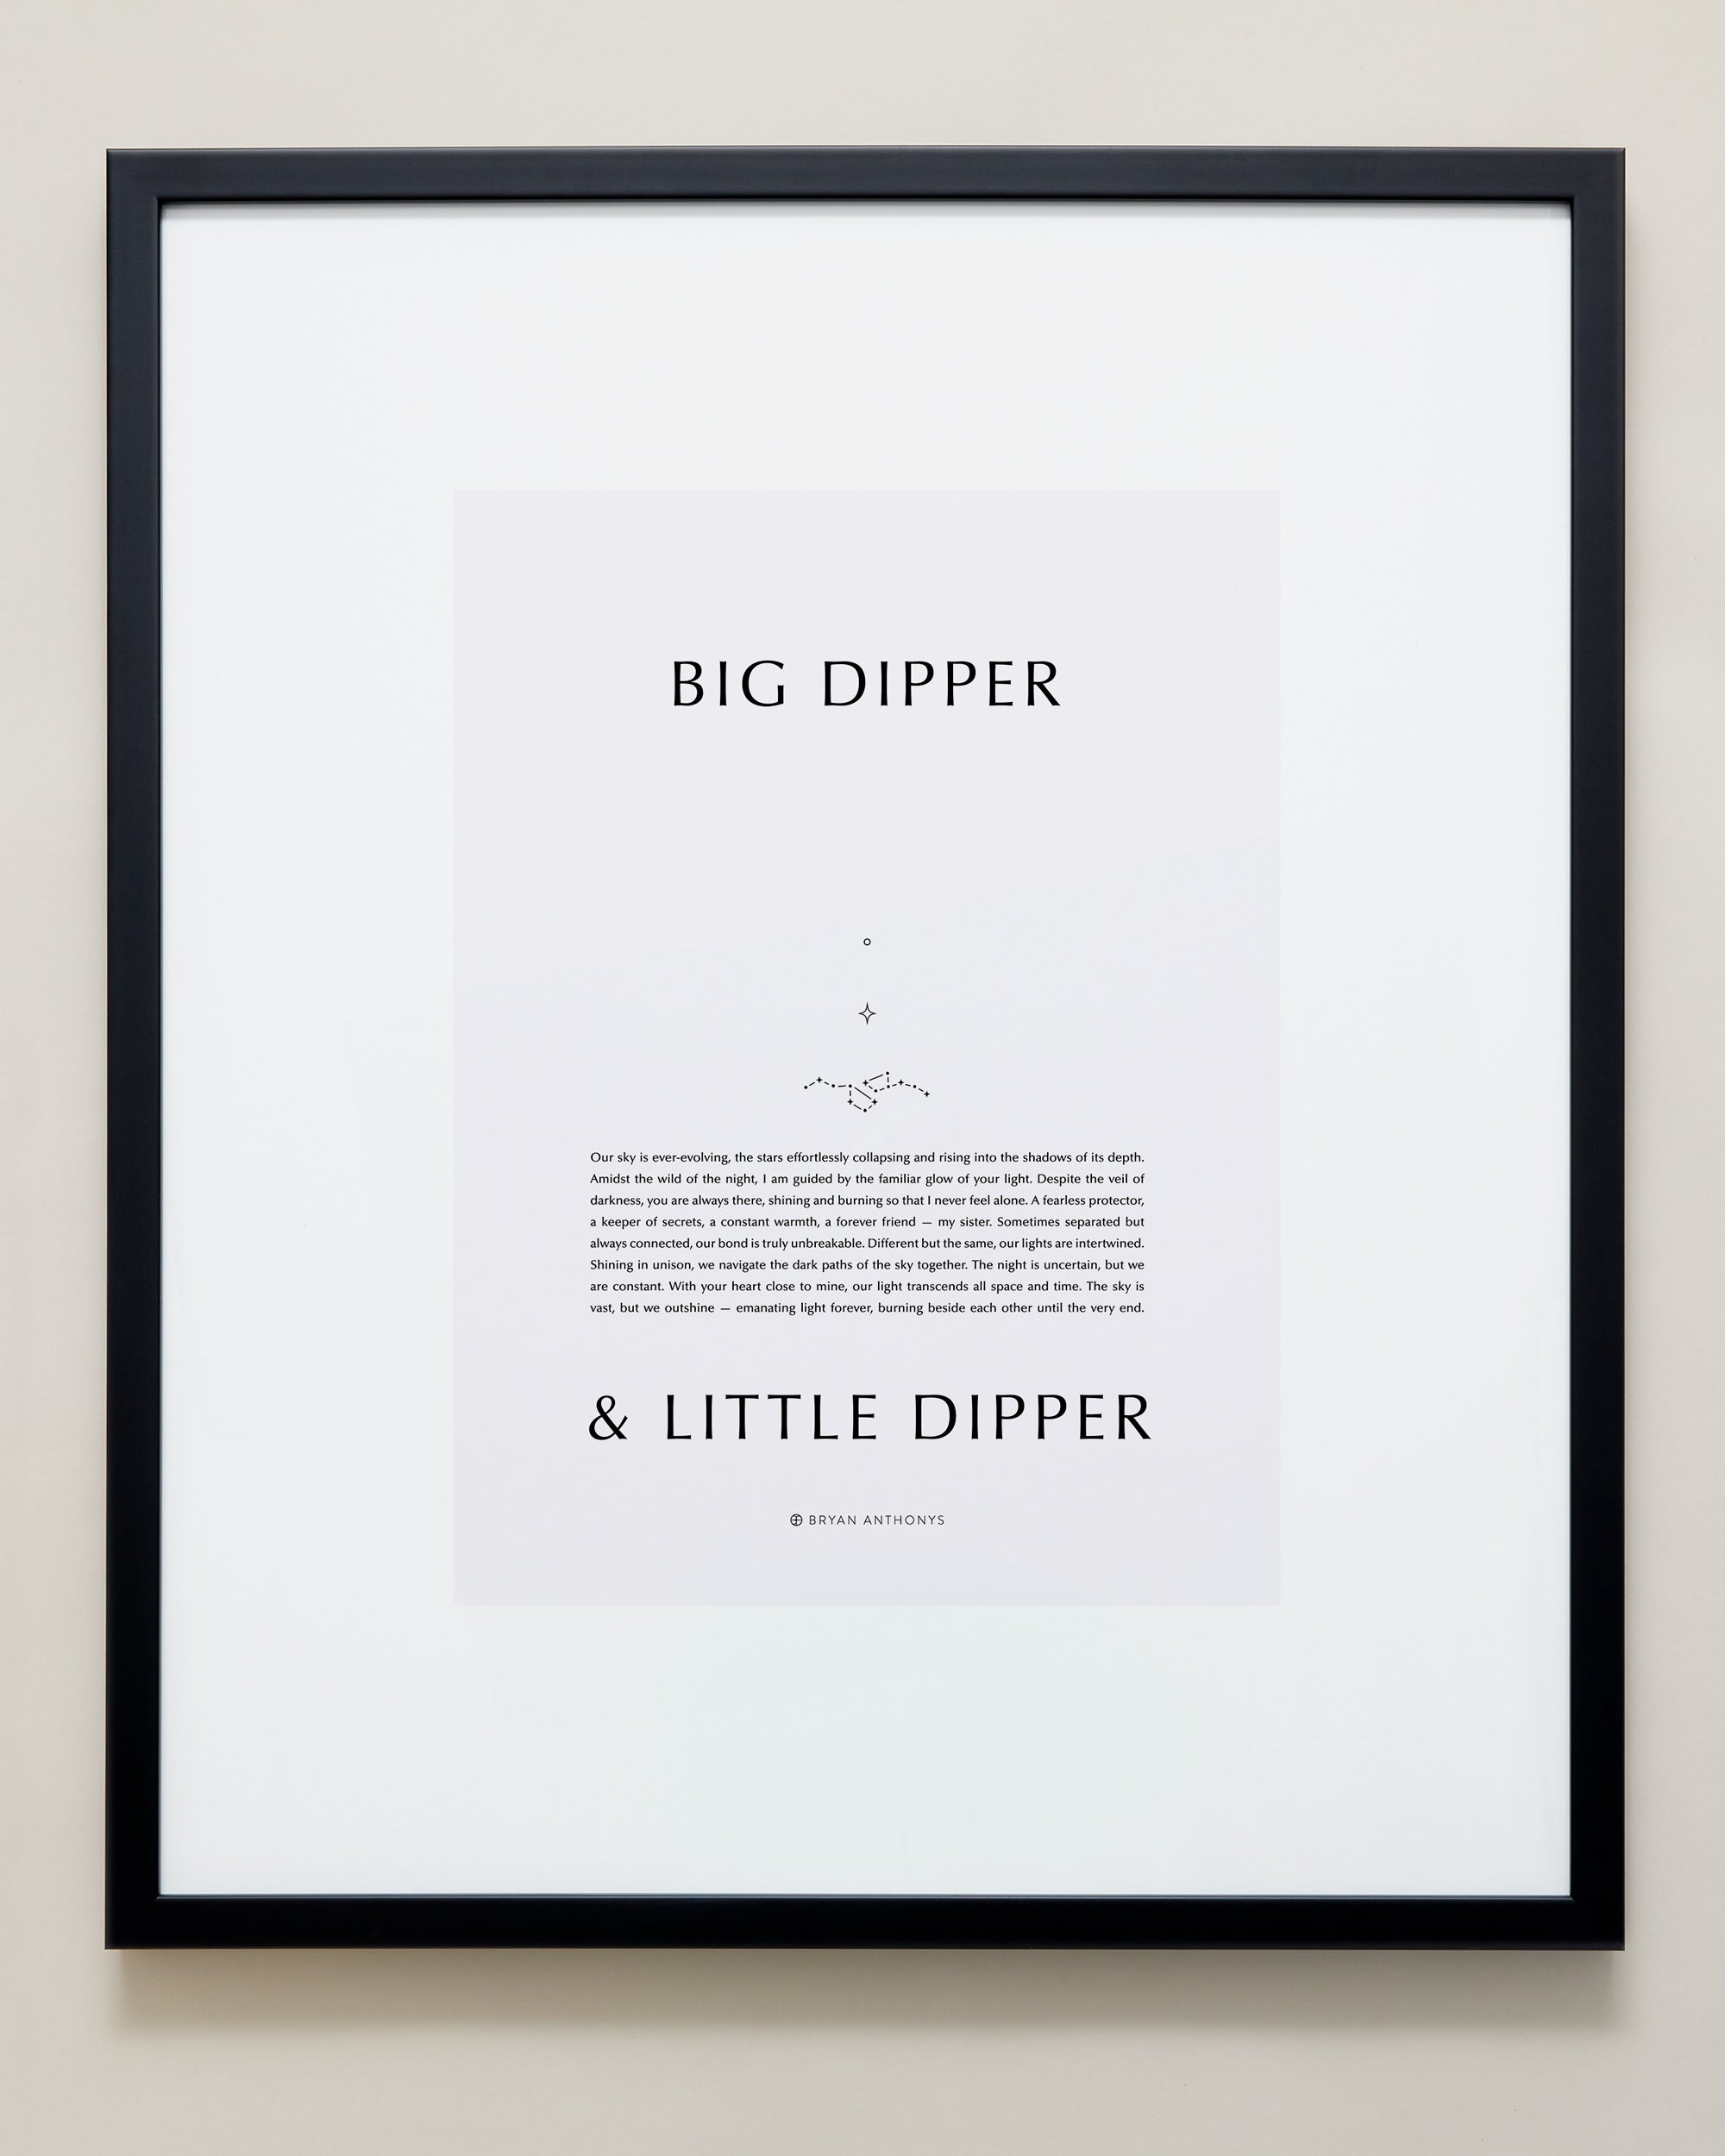 Bryan Anthonys Home Decor Purposeful Prints Big Dipper & Little Dipper Iconic Framed Print Gray Art With Black Frame 20x24